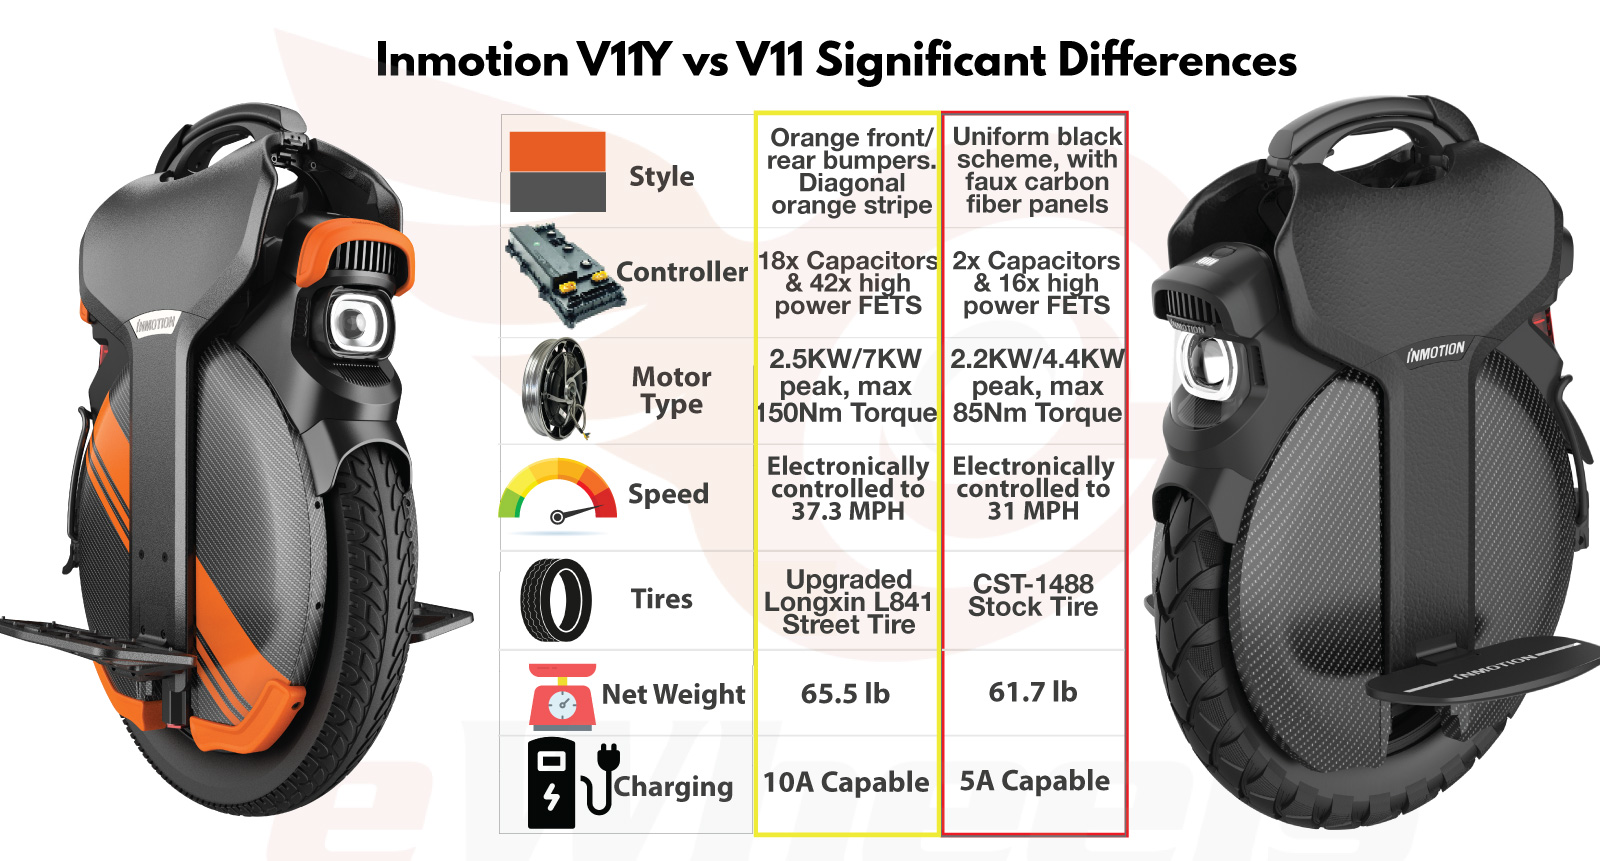 Inmotion V11Y vs V11 Technical Specifications Specs of Significant Differences